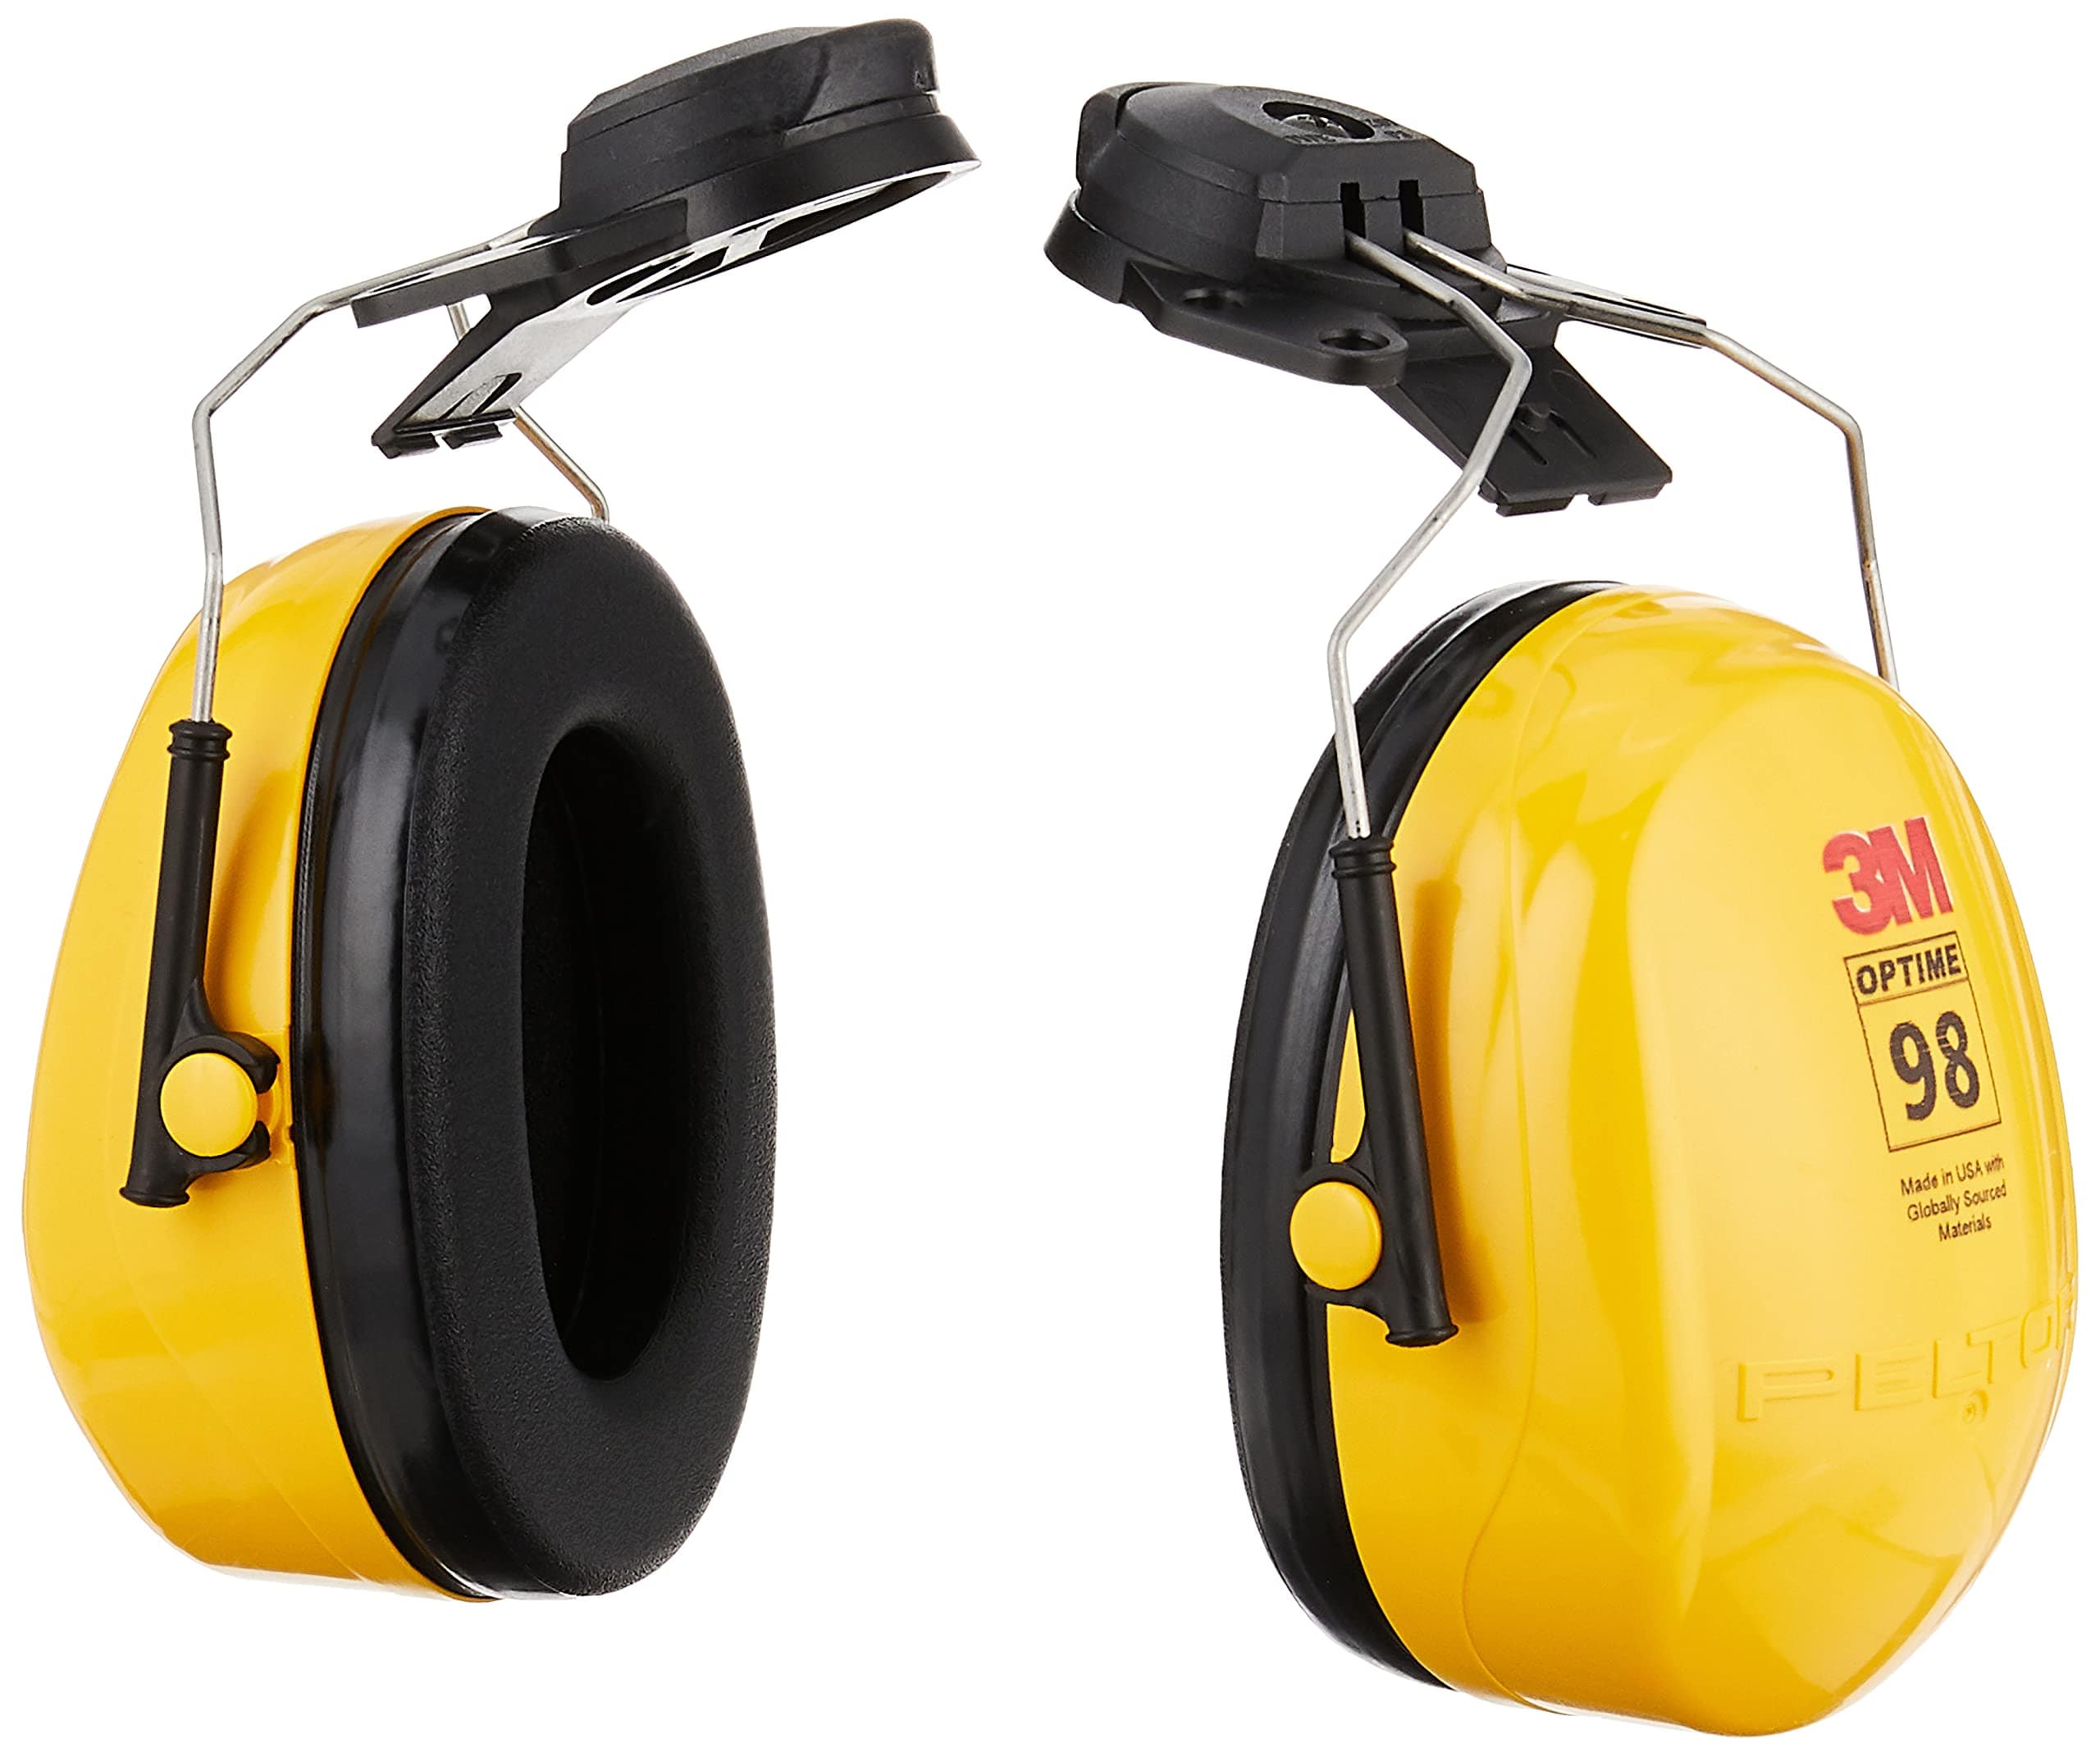 Yellow Ear Protection for Helmet - SH-3 | Supply Master Ghana, Accra Ear Protection Buy Tools hardware Building materials